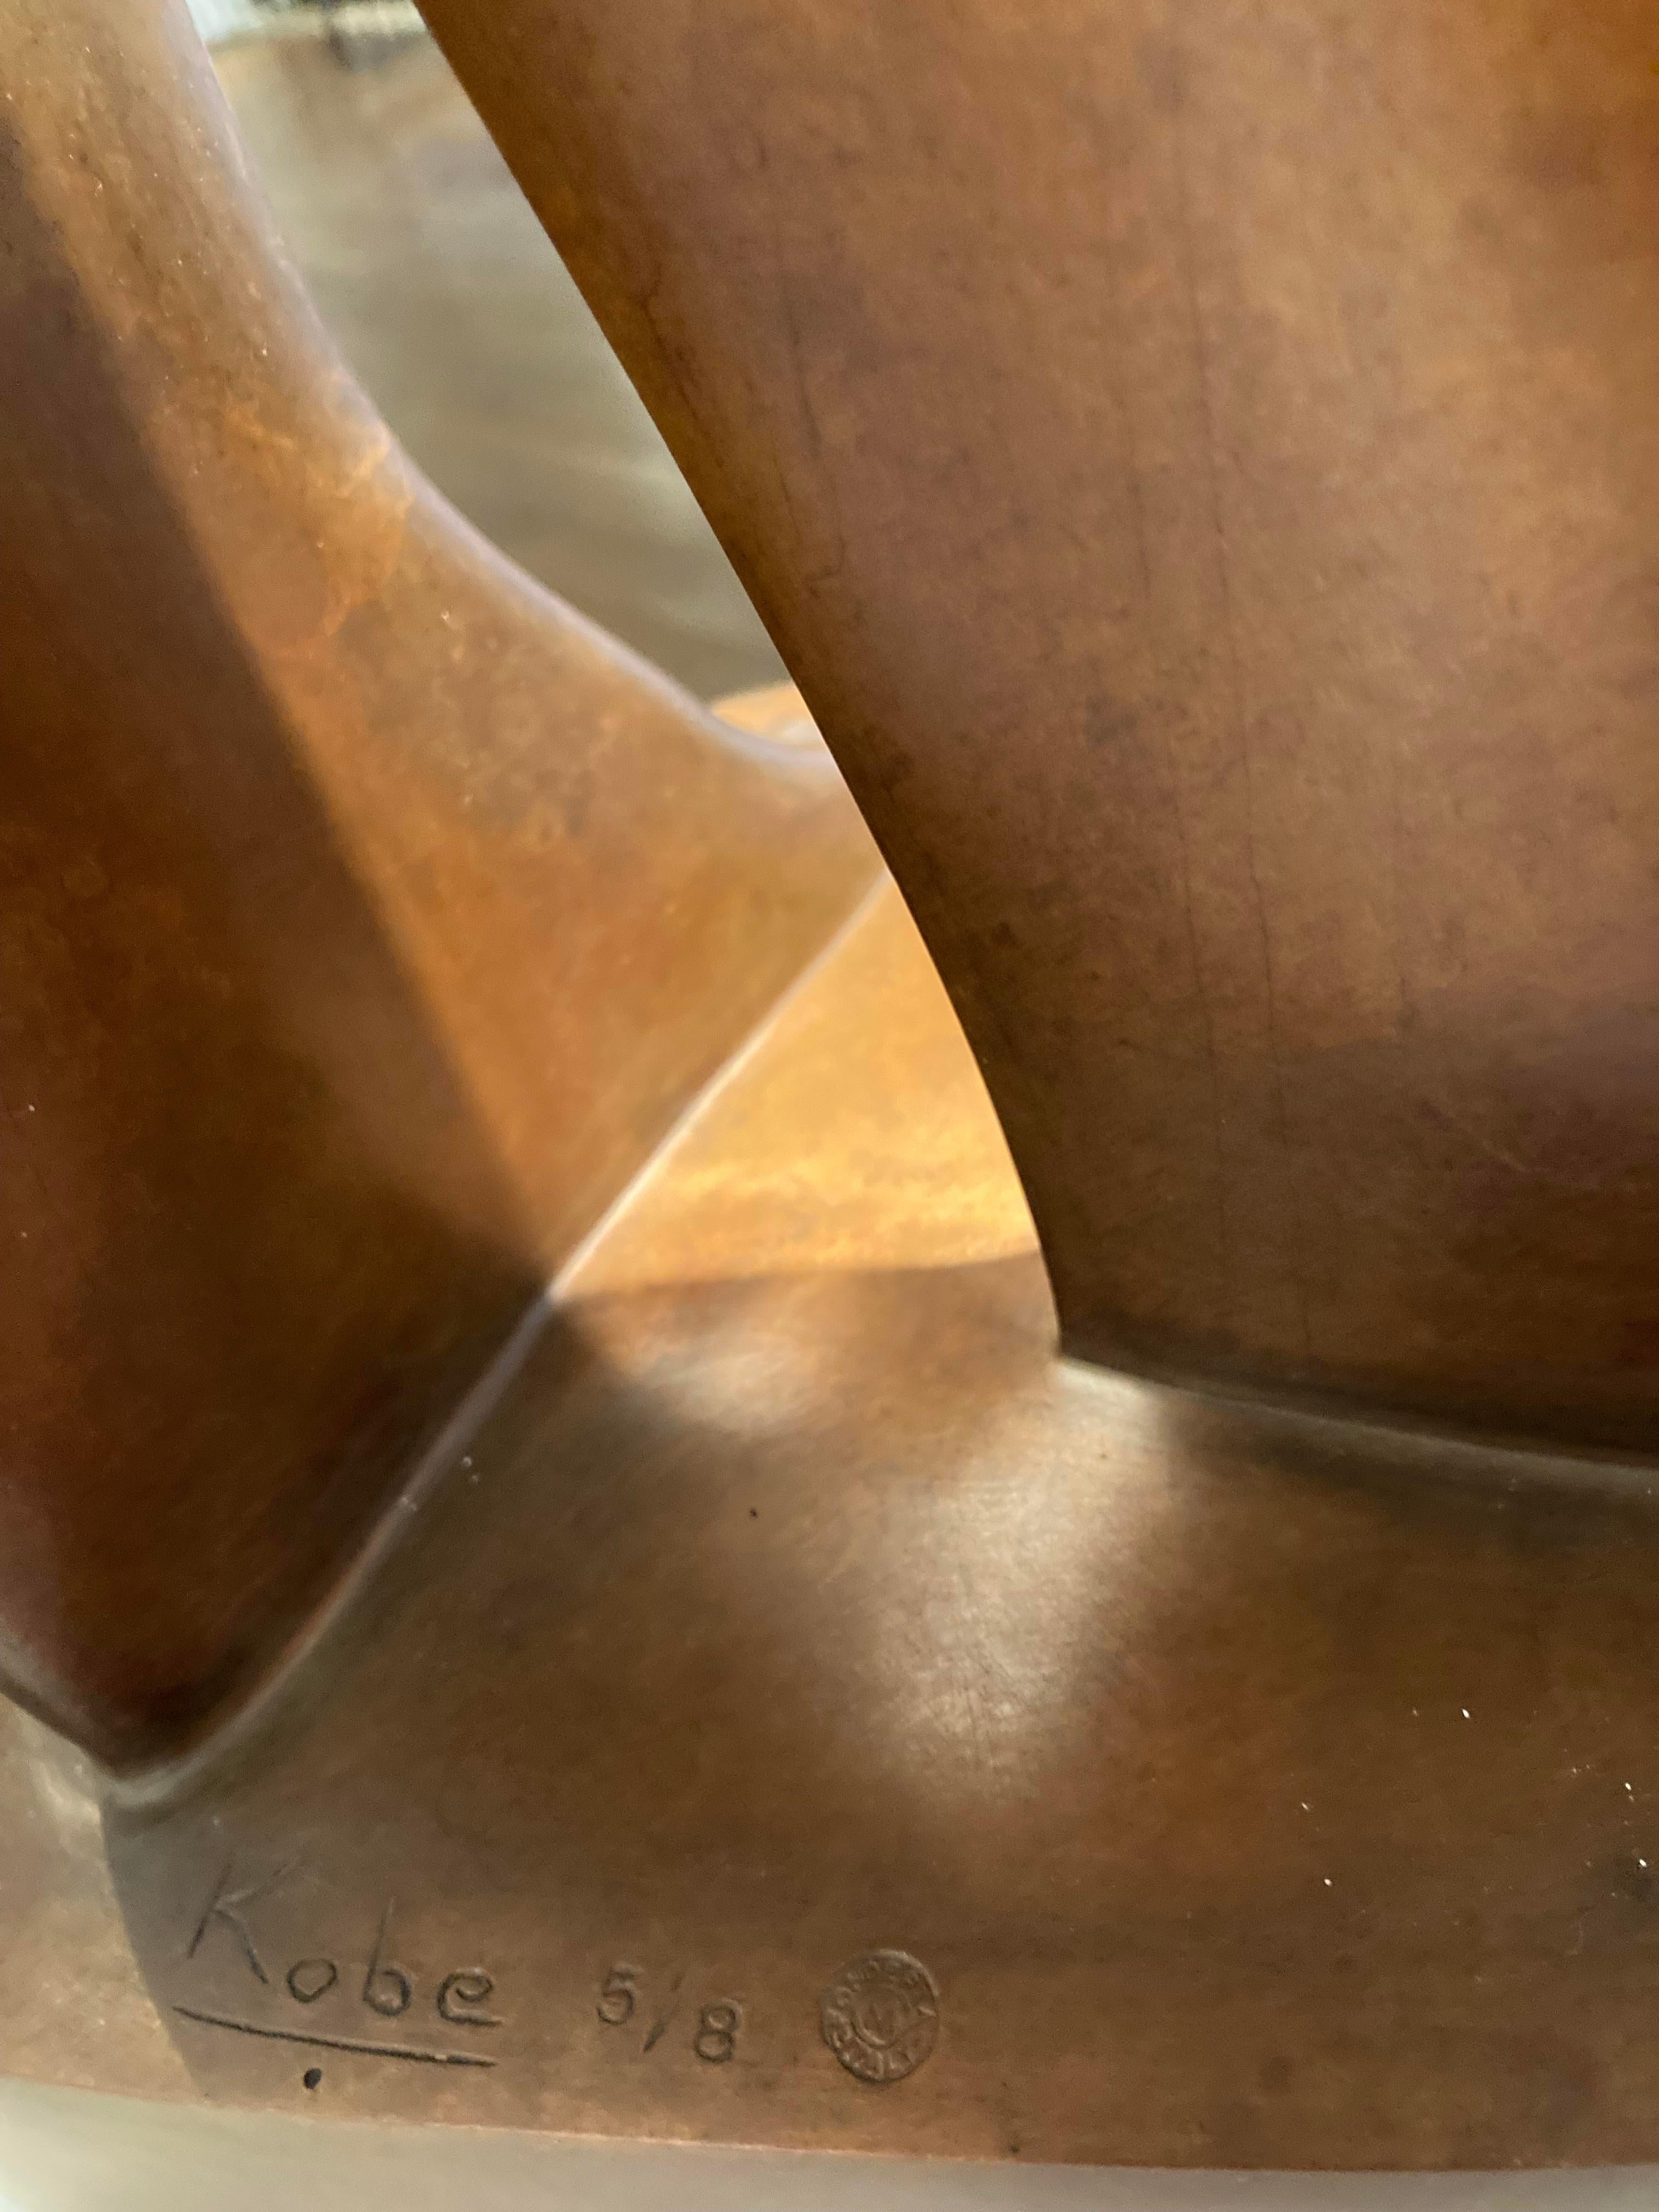 Hey Wait, I Can Be Sharp Too Bronze Sculpture Nude Girl Figure Brown In Stock

KOBE, pseudonym of Jacques Saelens, was a Belgian artist (Kortrijk, Belgium 1950 – Saint-Julien (Var), France 2014).

He combined the broad with sophistication. Two